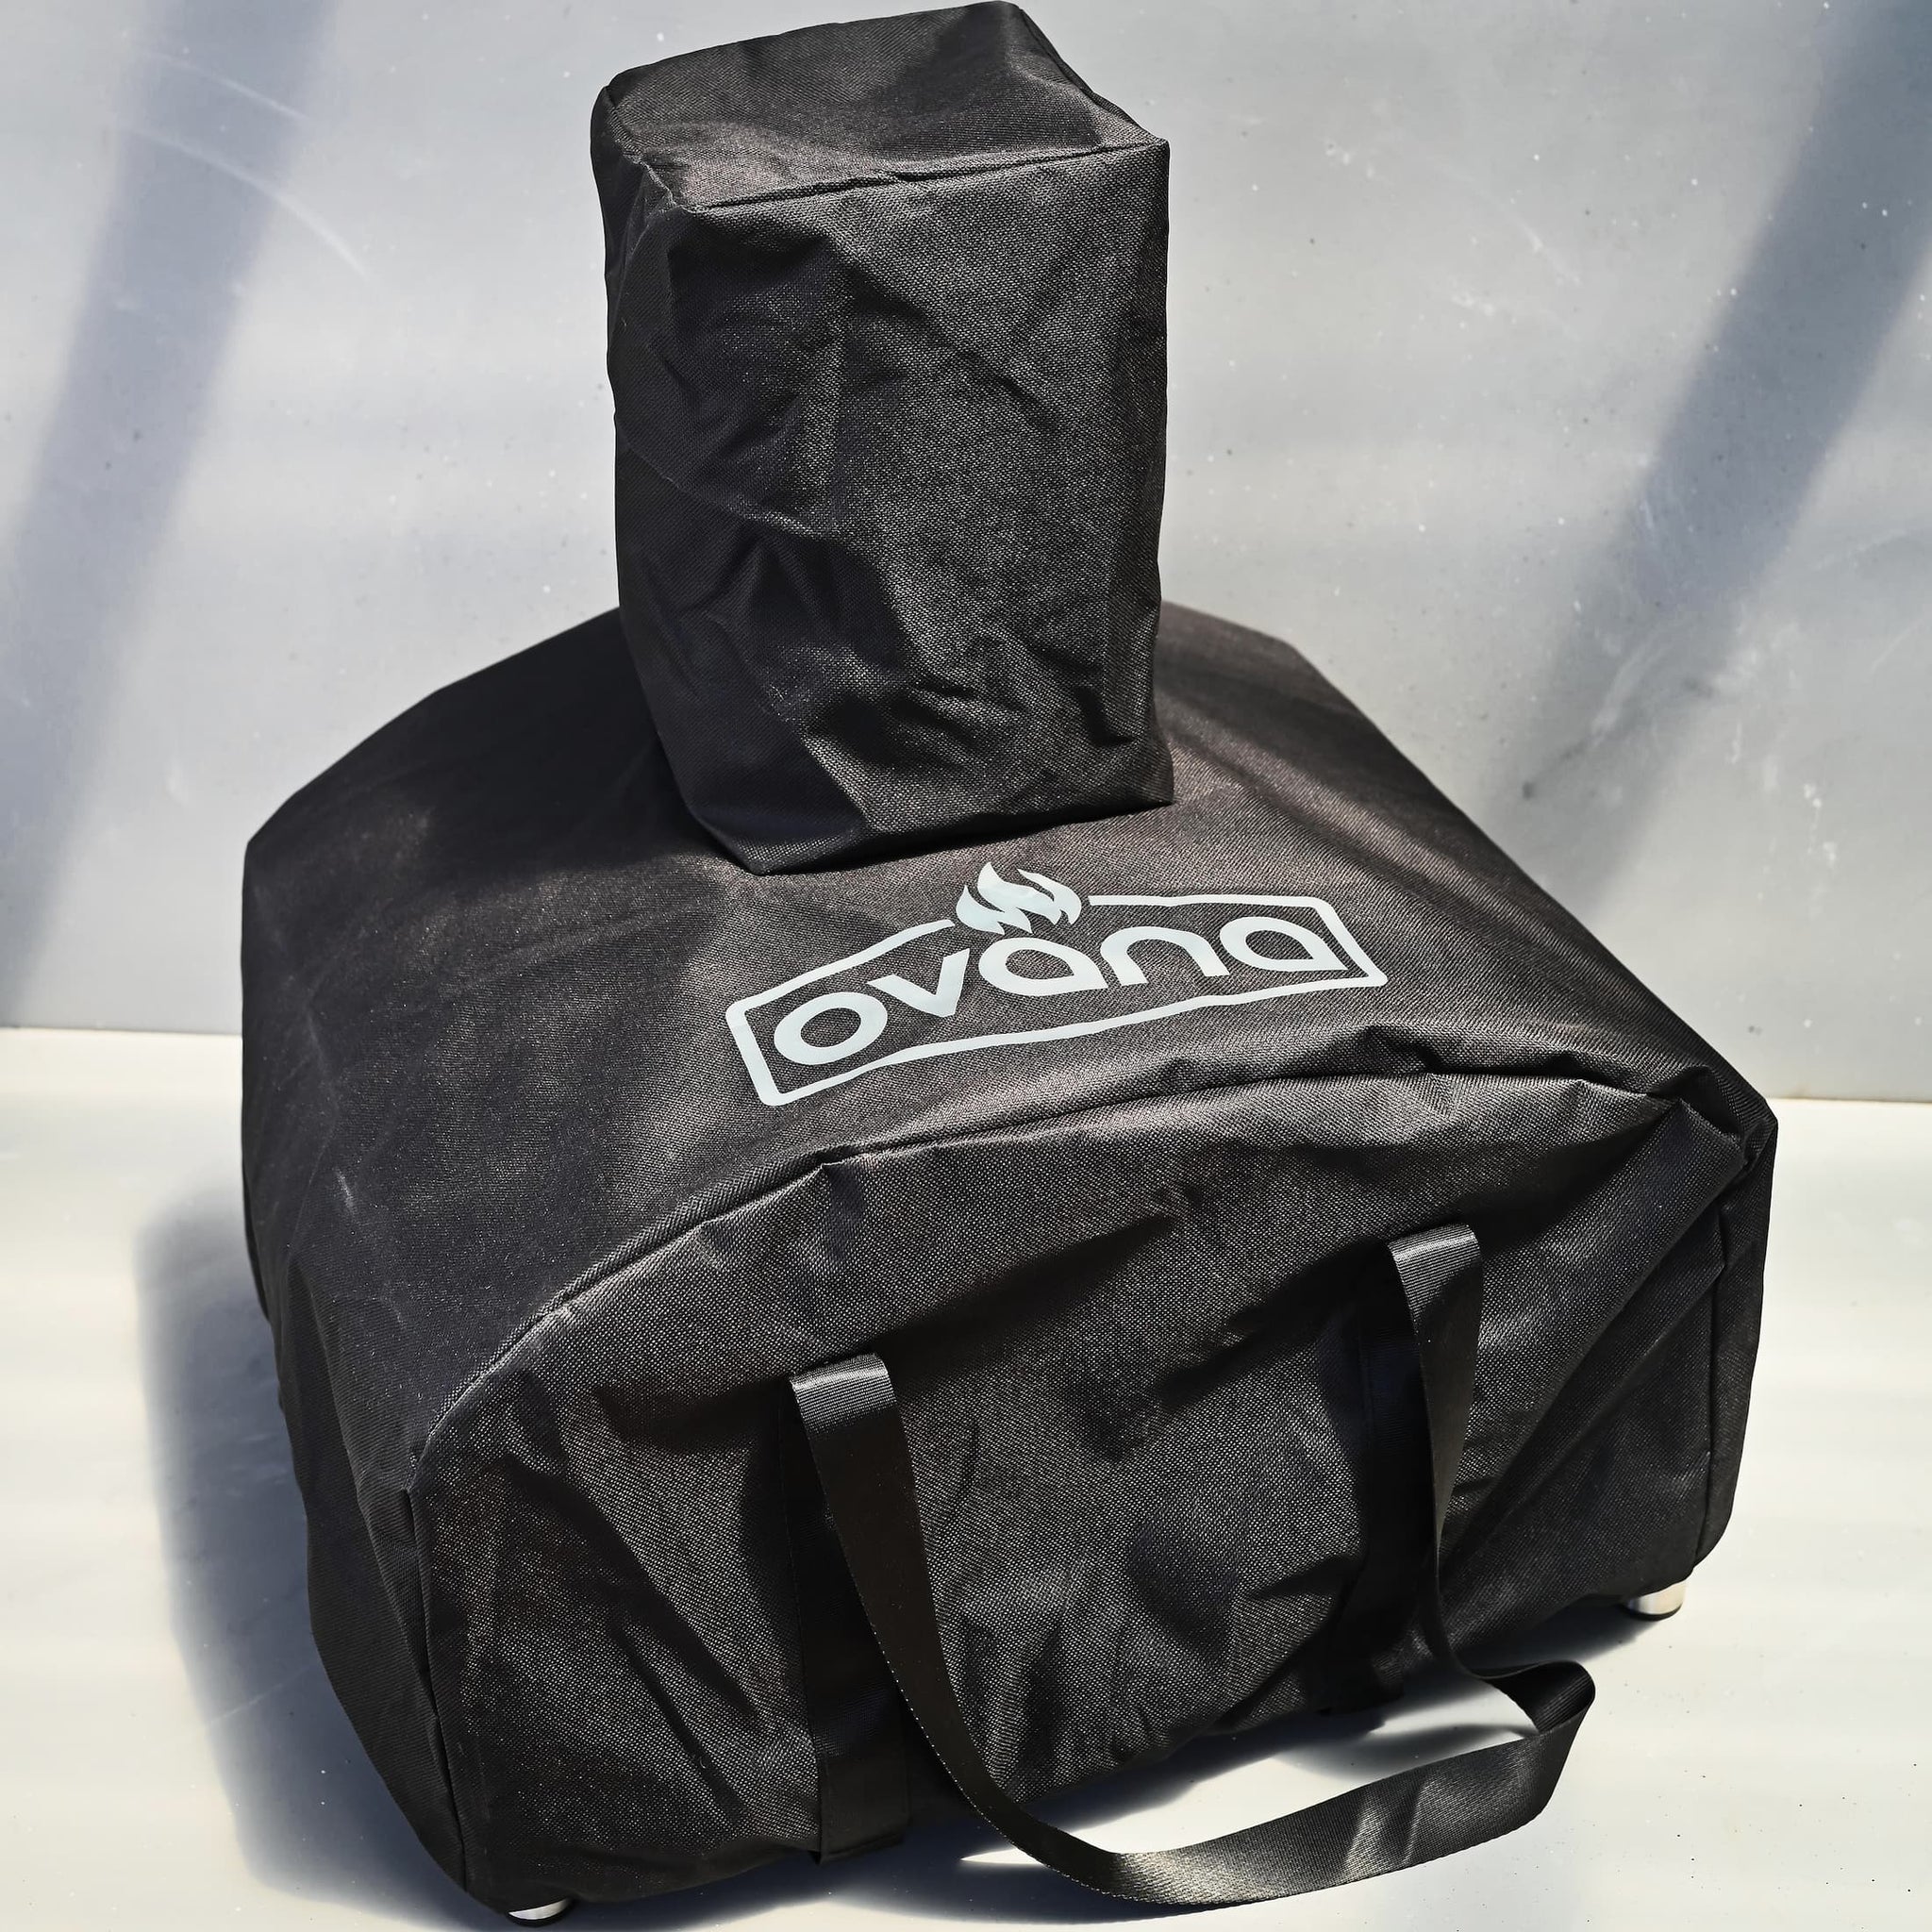 Thermomix-New-Zealand Thermomix® Ovana Waterproof Carry Cover